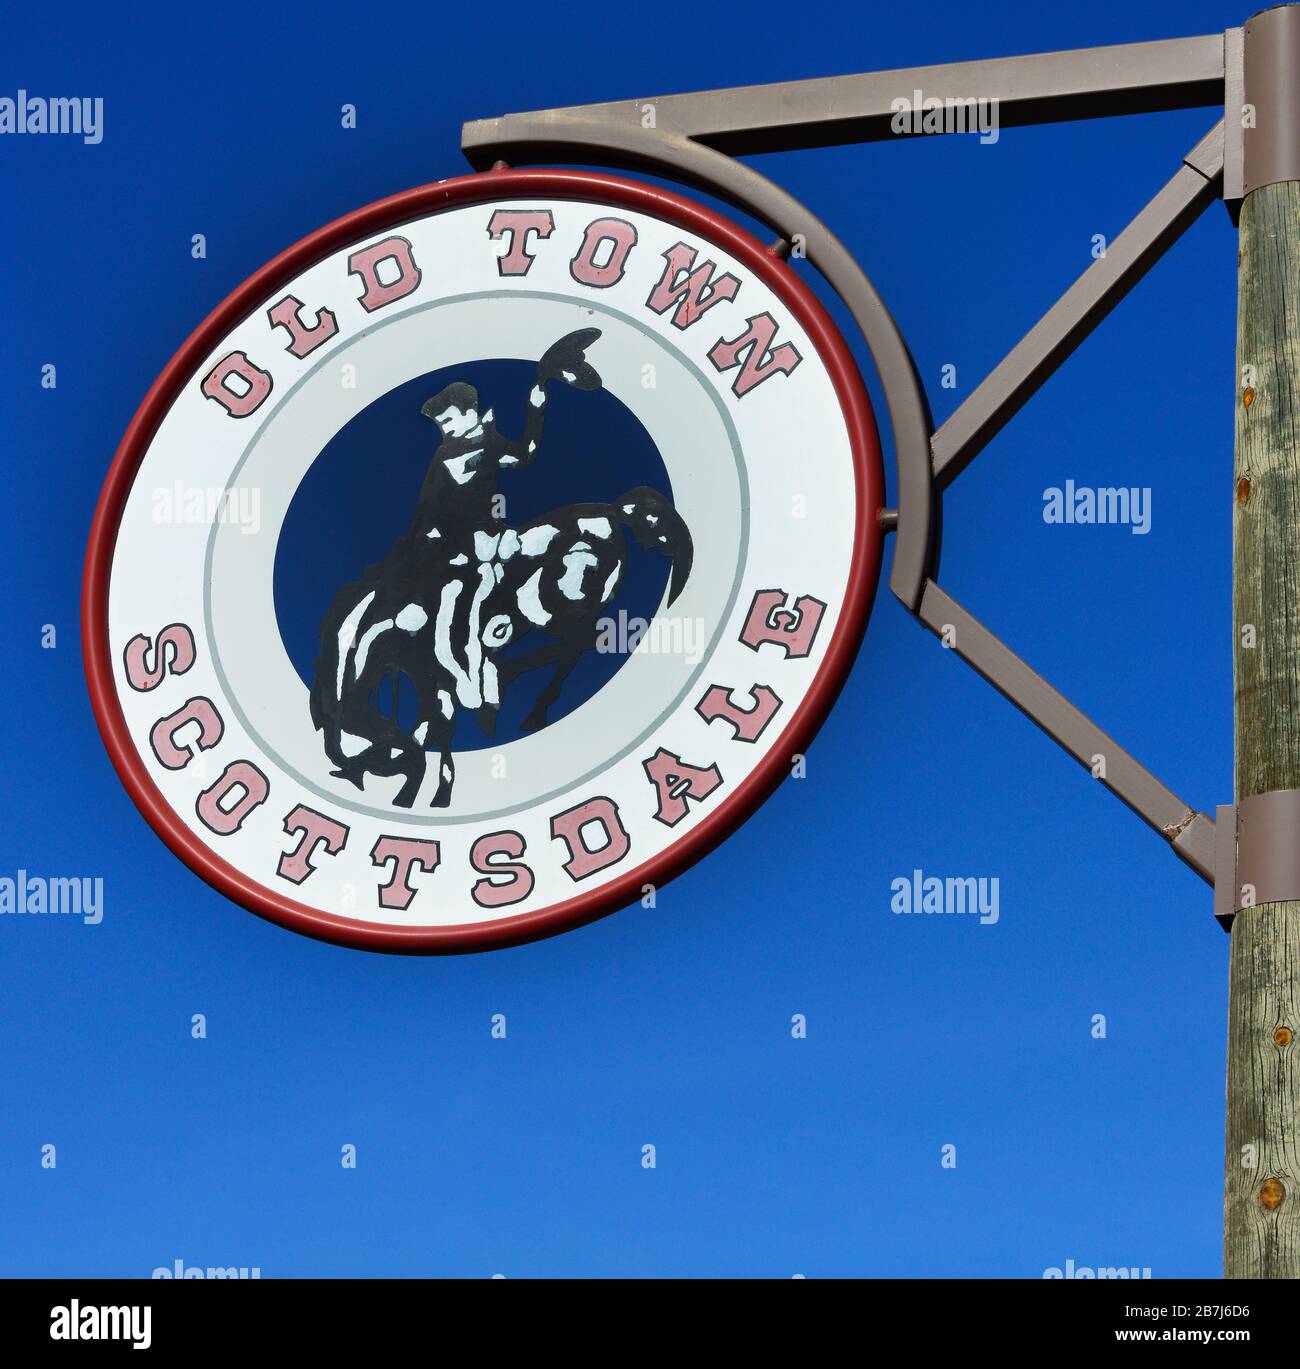 A round Old town Scottsdale sign in red and blue with a bucking bronco & cowboy clip art in center hangs from wooden post in Old town Scottsdale, AZ Stock Photo